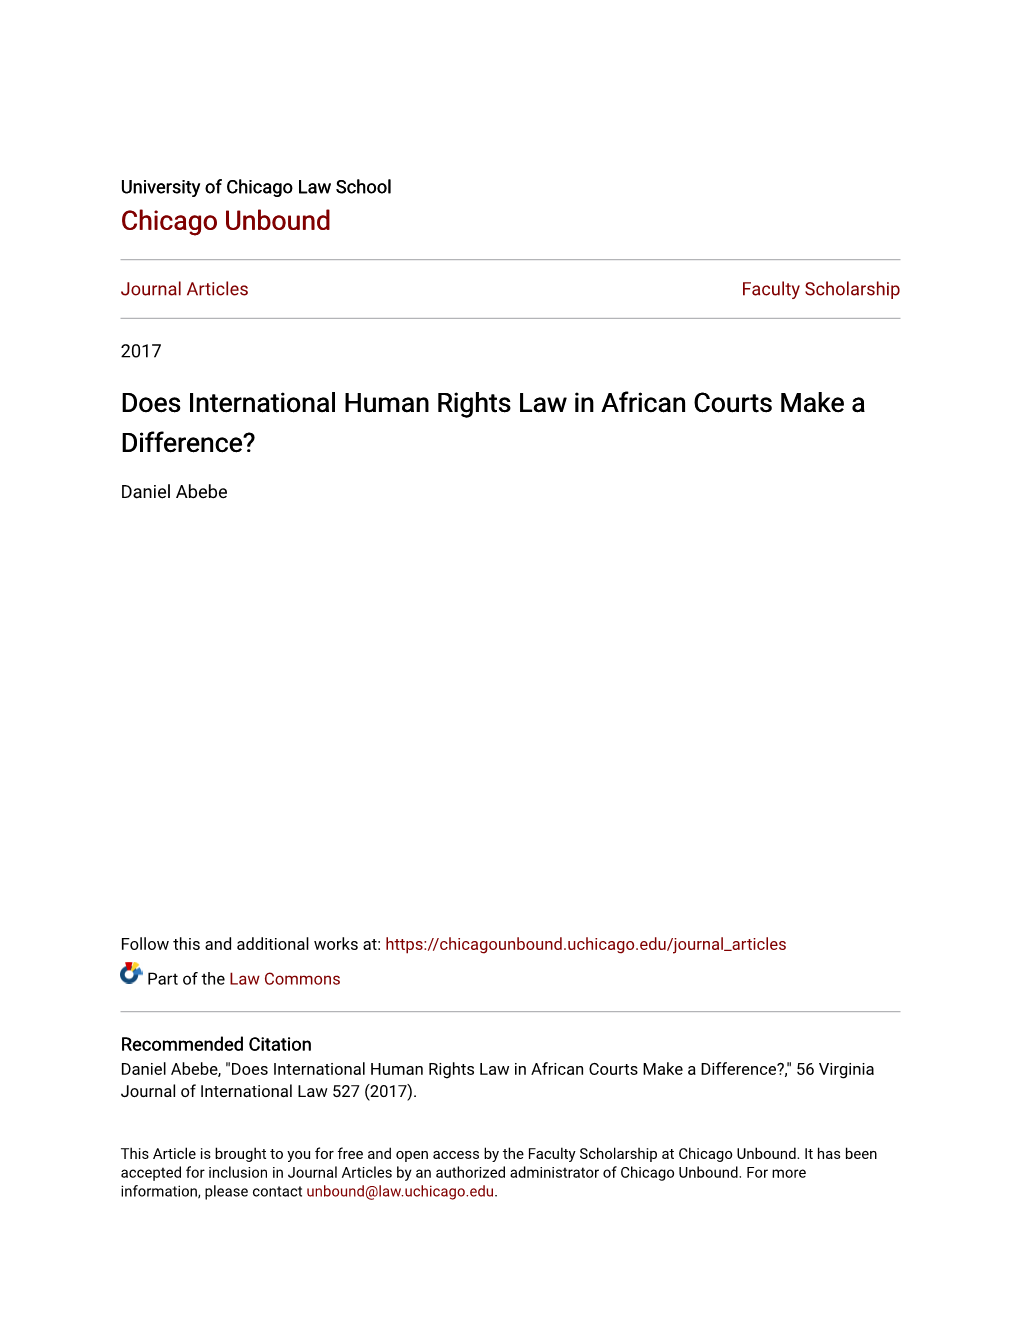 Does International Human Rights Law in African Courts Make a Difference?